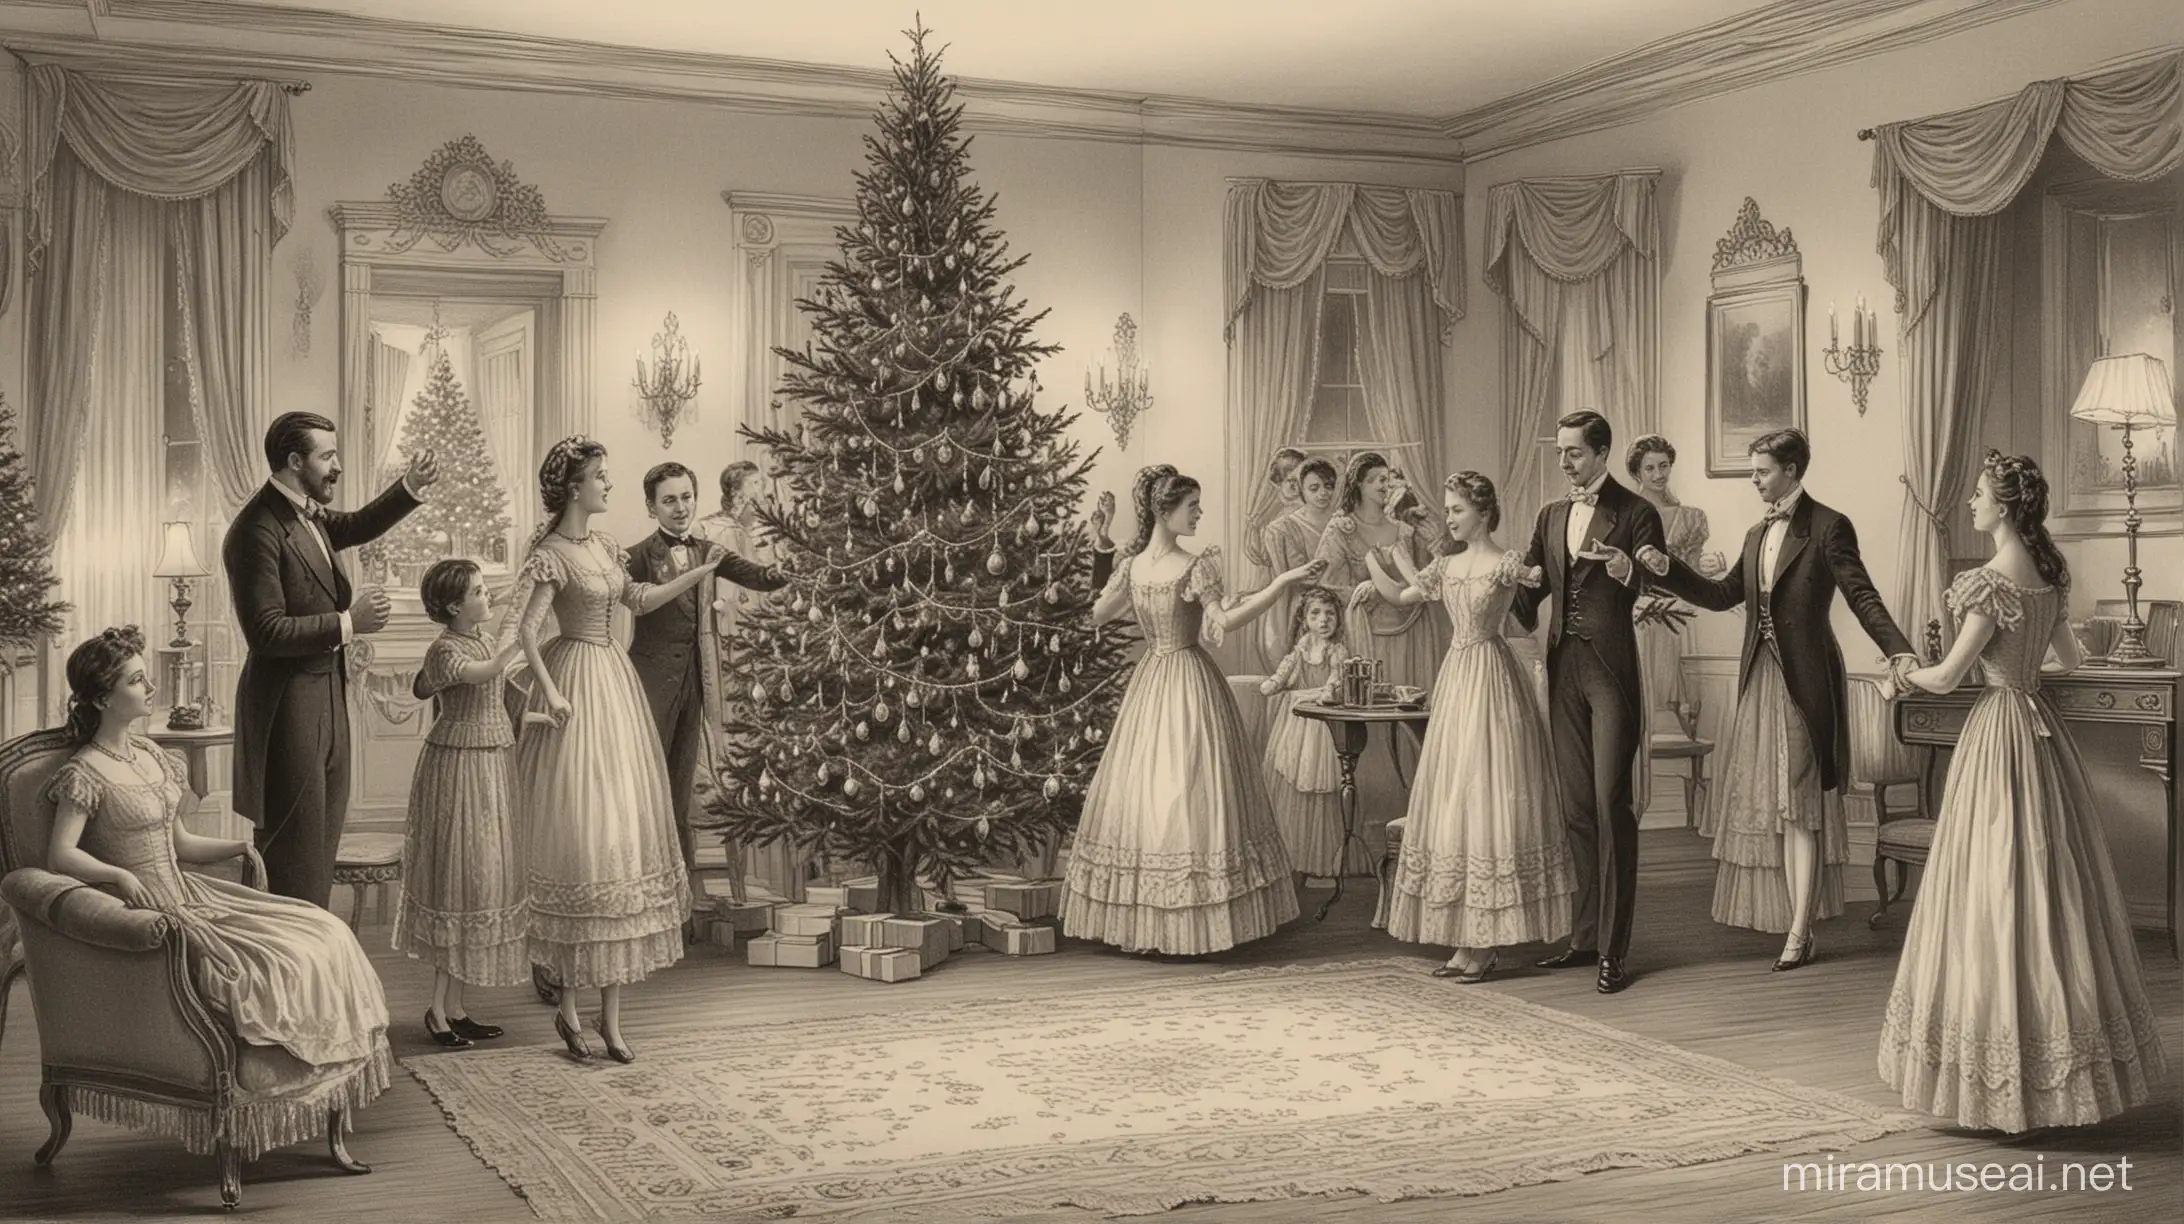 
A Victorian engraving shows children and adults dancing around the Christmas tree in their living room. The people are wearing long dresses or suits with shoes. The christmas tree is decorated with lights and garlands, as it is winter outside. It has been drawn by hand using straight lines art only with very good detail in the style of the artist. Black ink on white paper, the background color is cream.